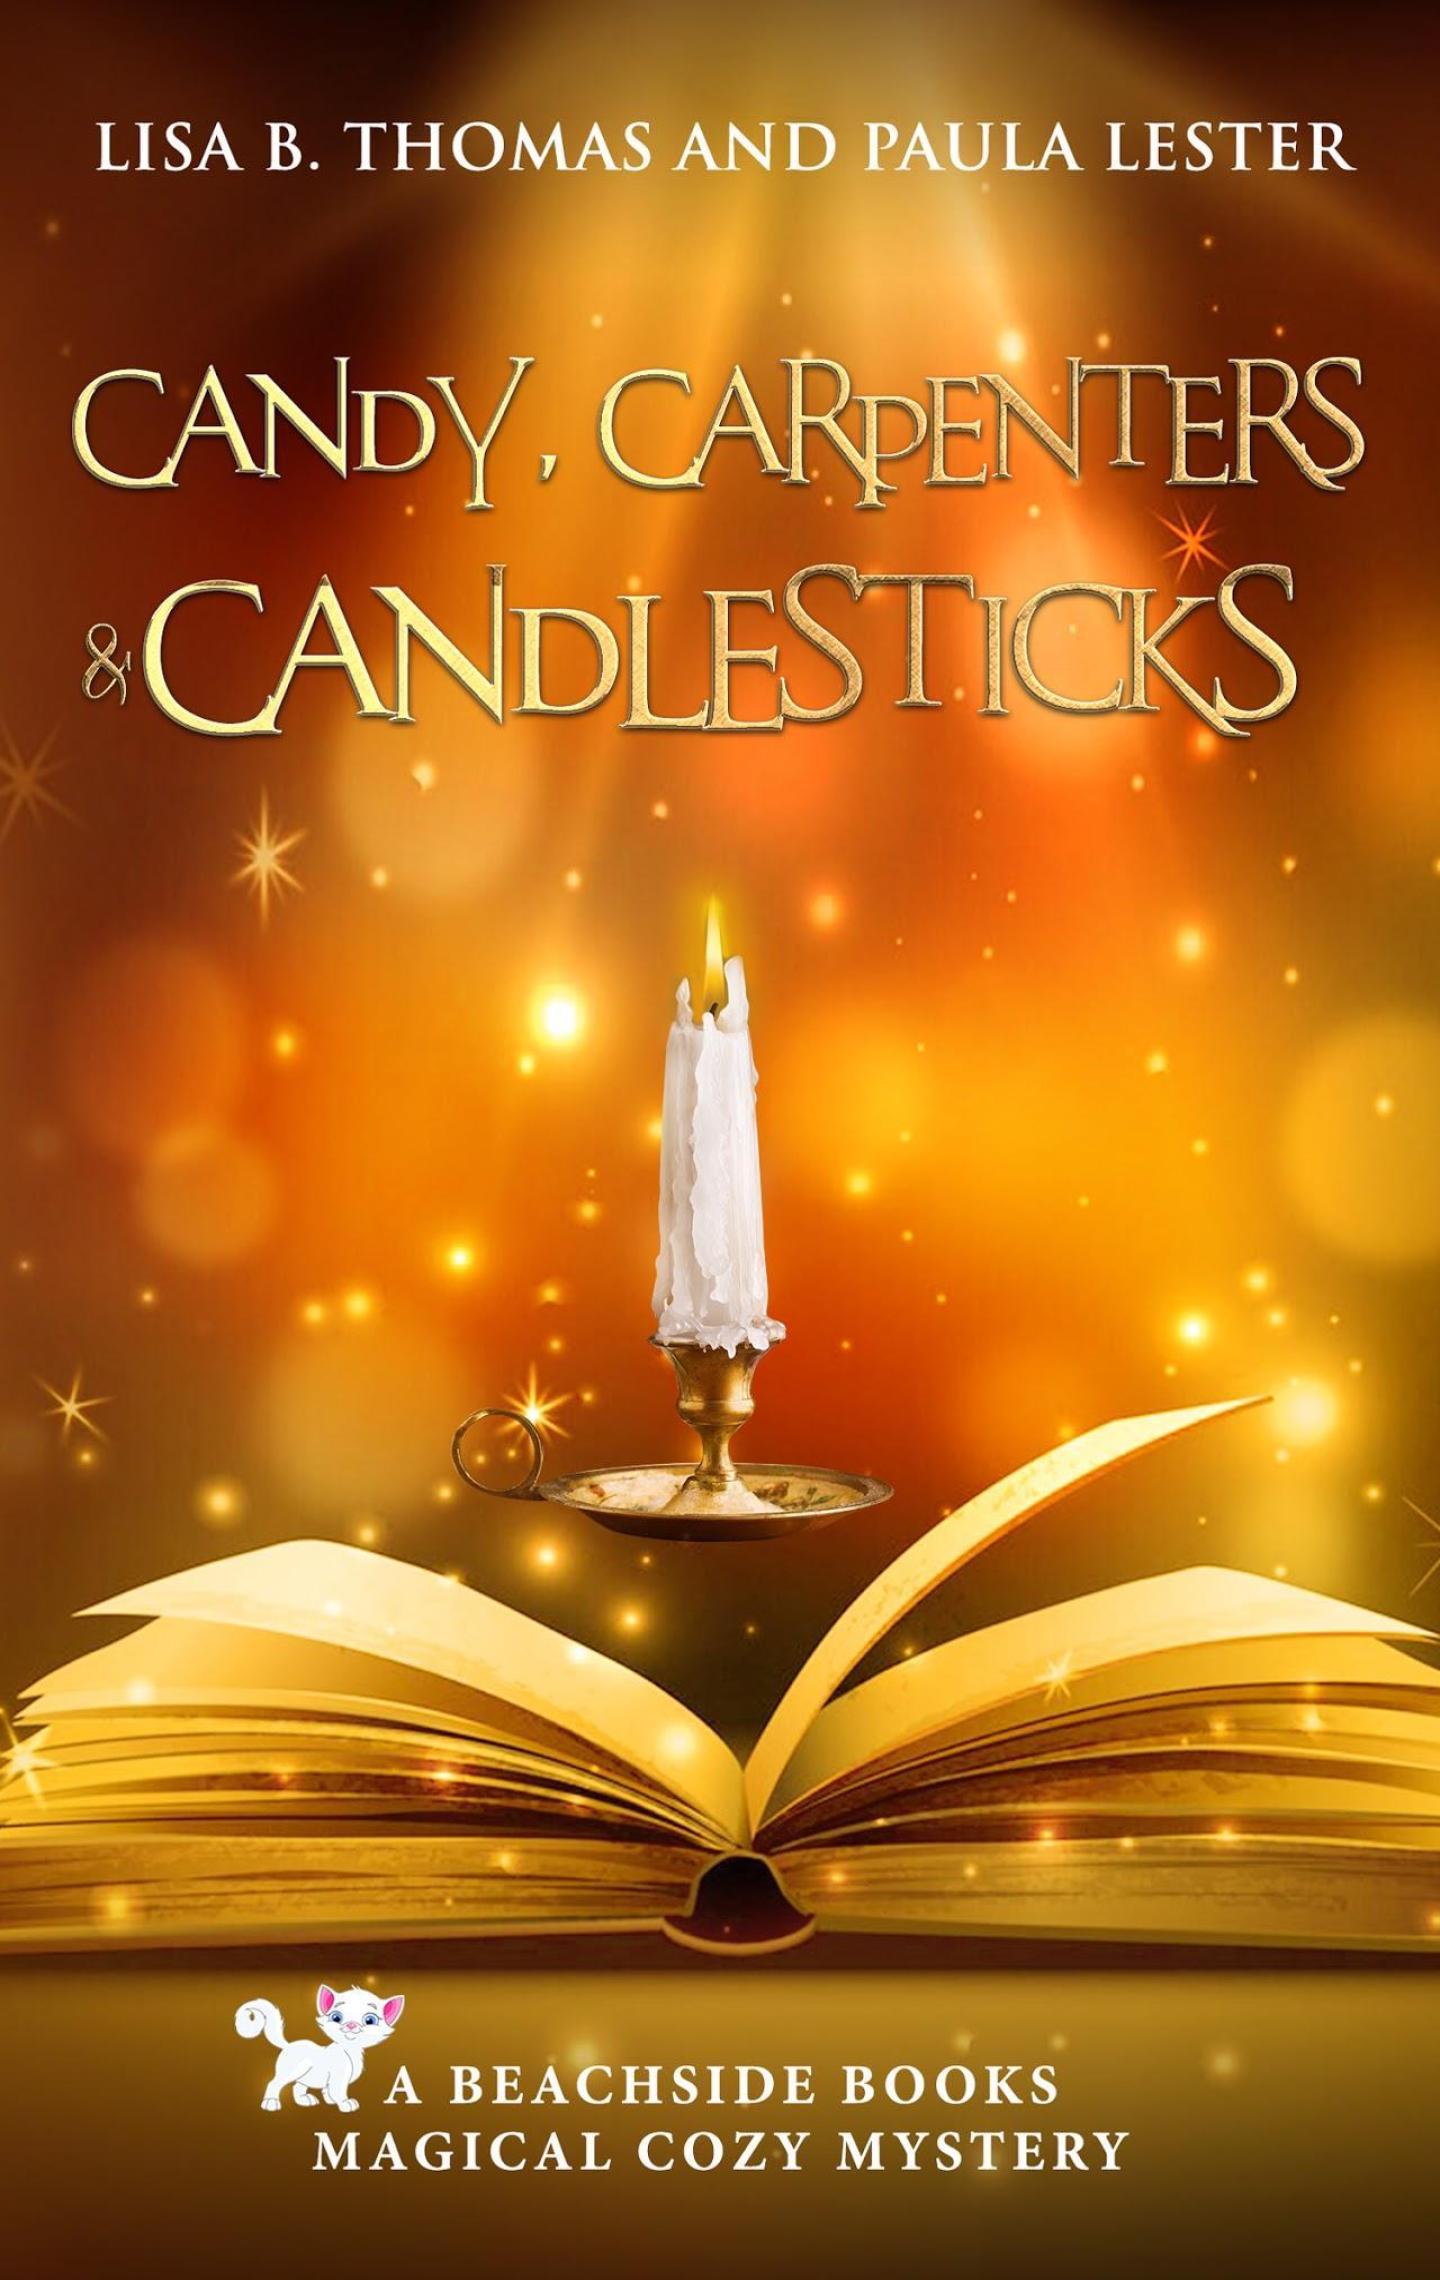 Candy, Carpenters and Candlesticks